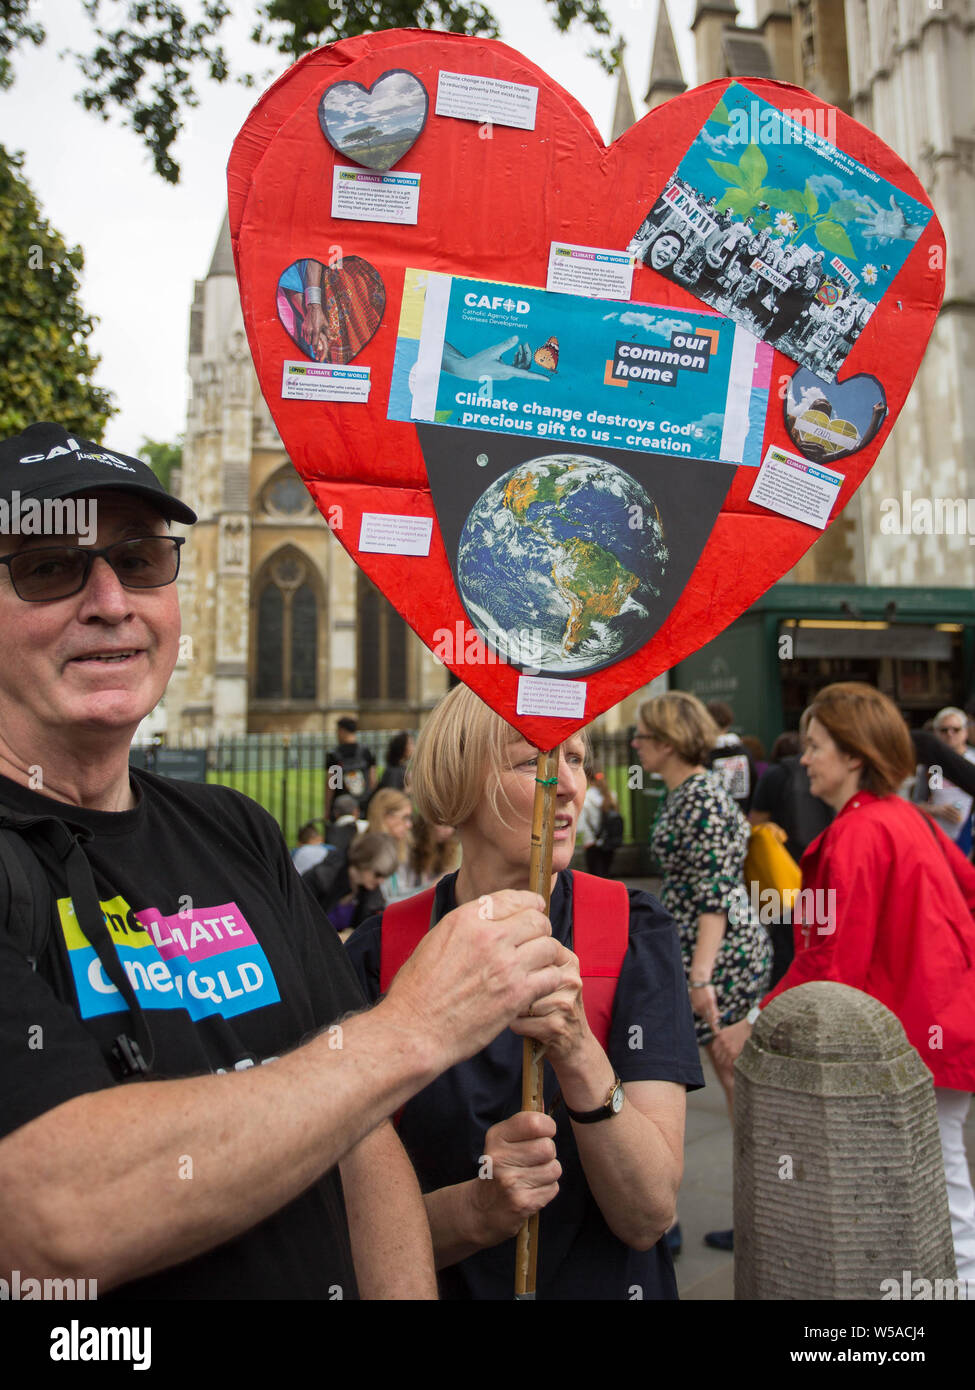 Time is Now mass lobby sees climate campaigners converge on Westminster calling for the government to address environmental issues including plastic pollution, air pollution and damage to natural habitats. Featuring: Atmosphere, View Where: London, United Kingdom When: 26 Jun 2019 Credit: Wheatley/WENN Stock Photo